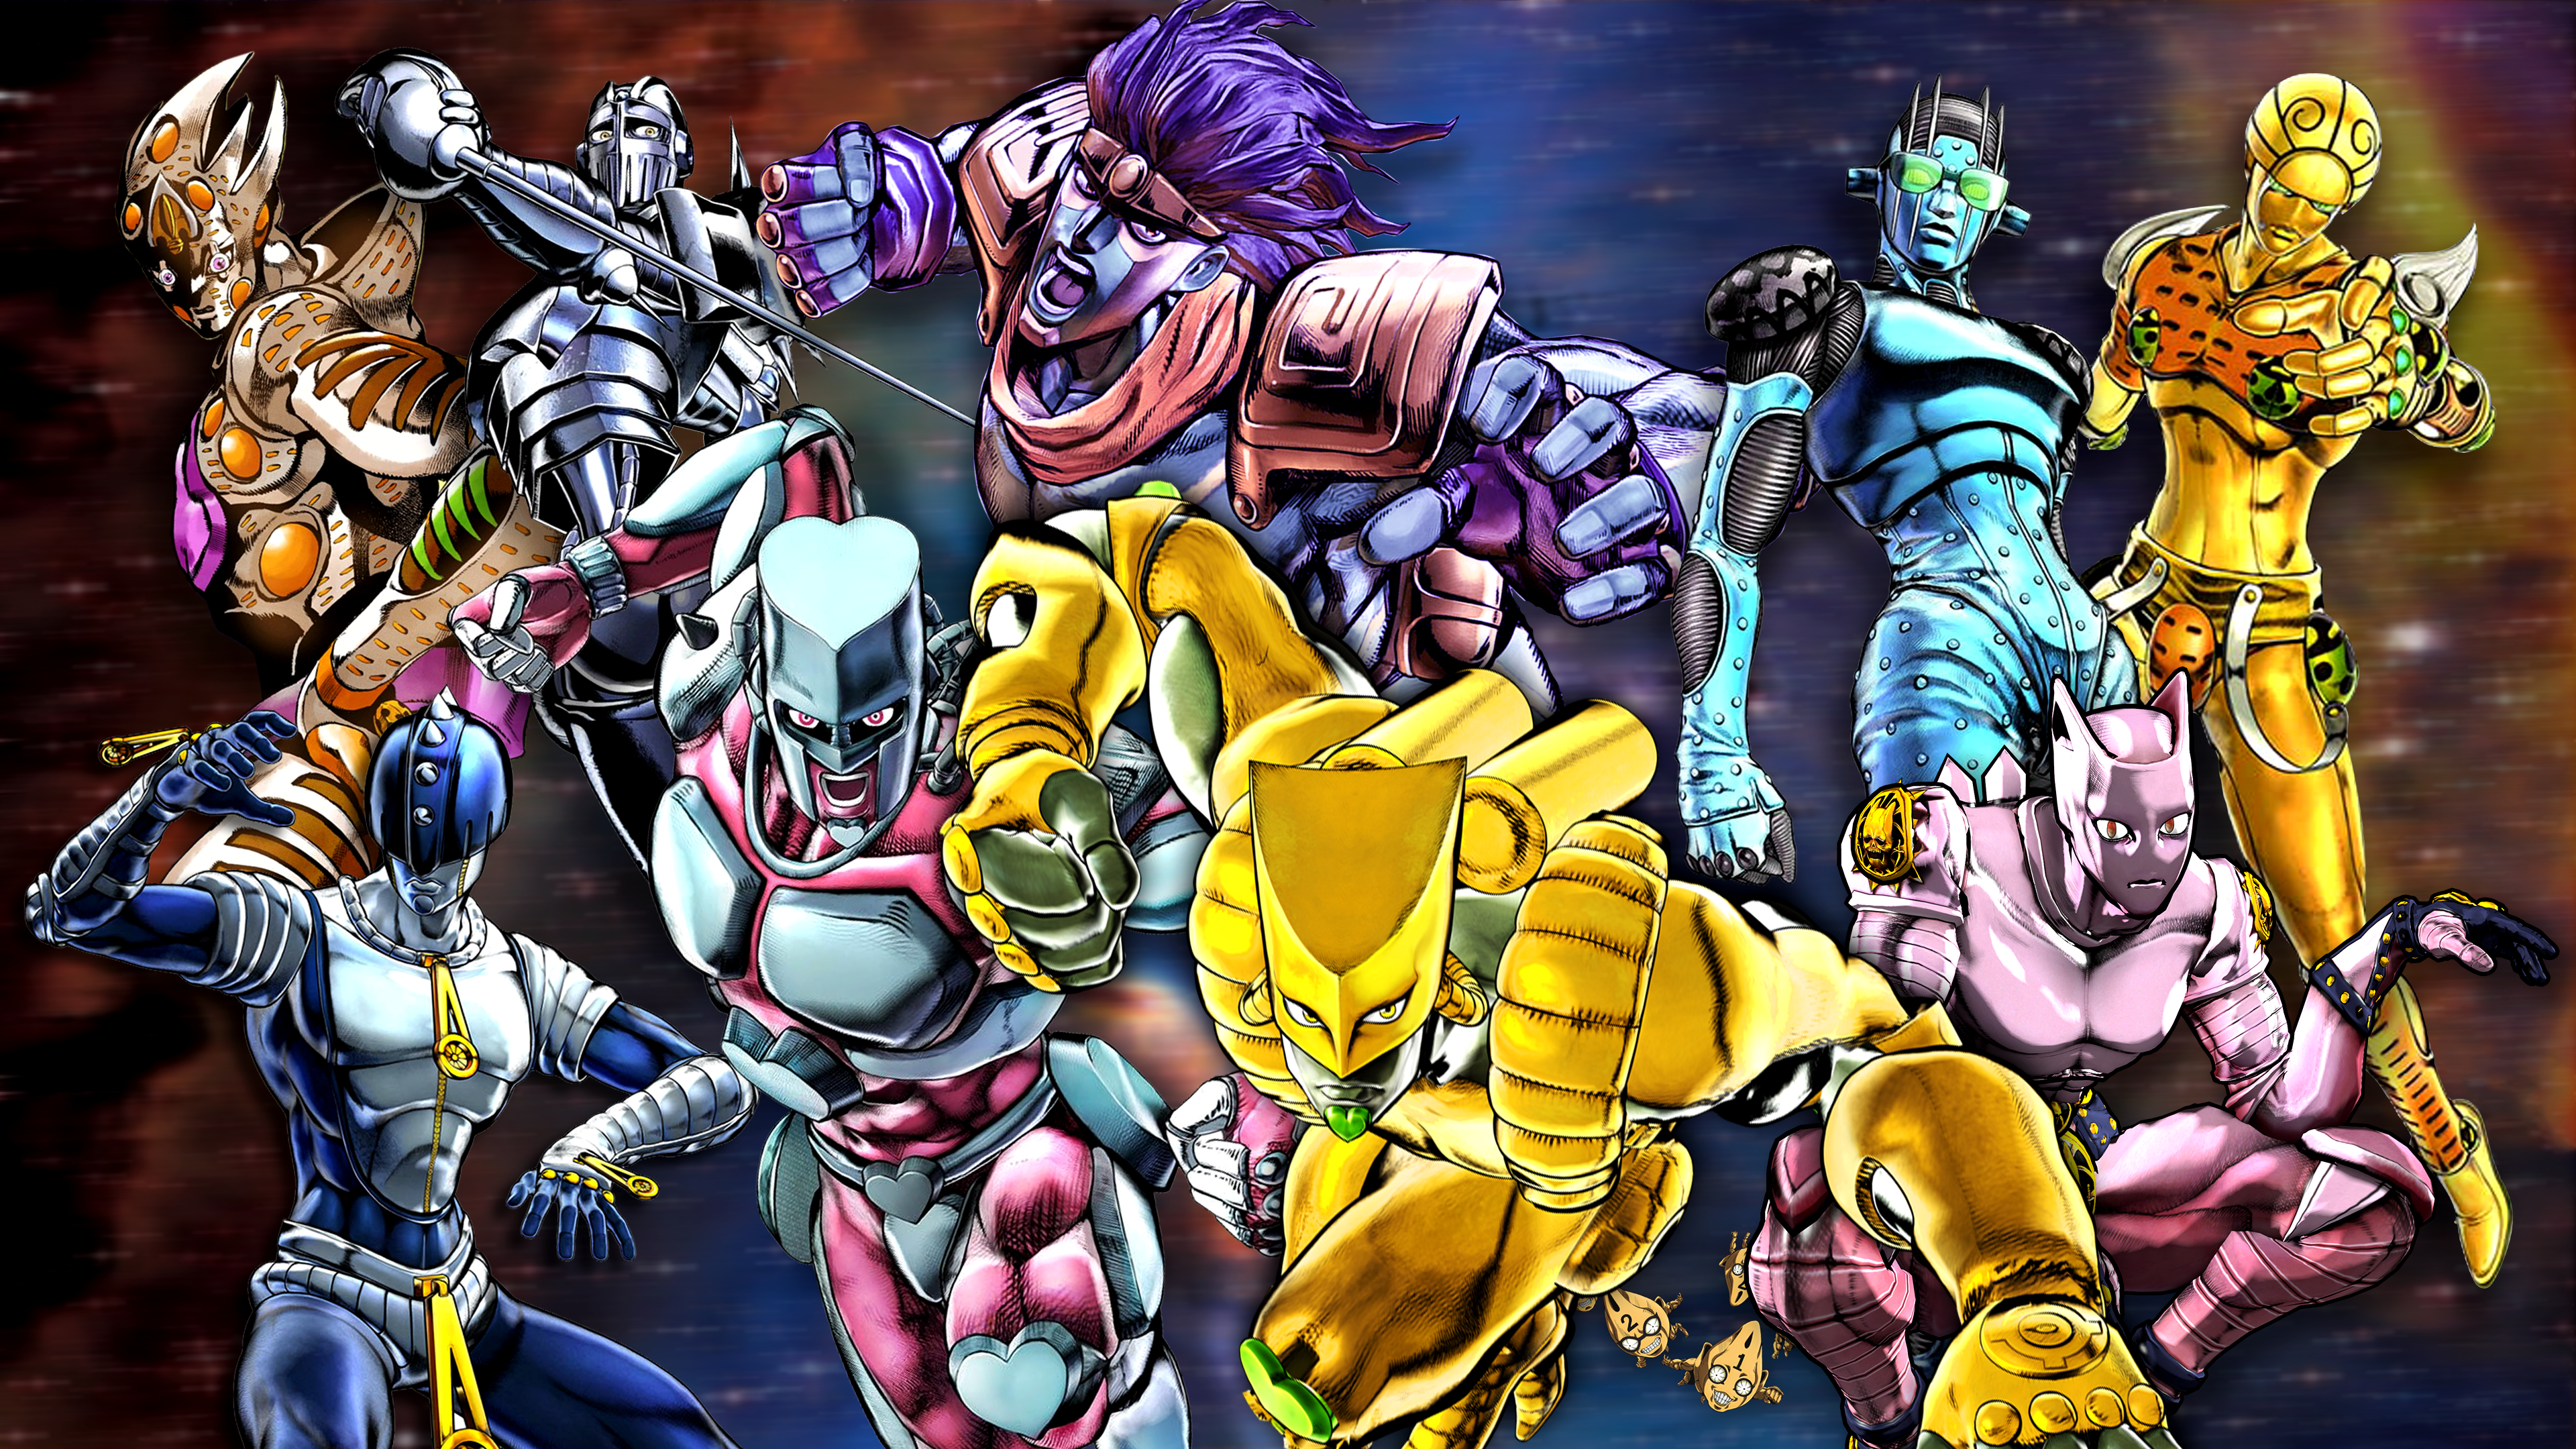 Fanart wallpaper with some of my favorite stands